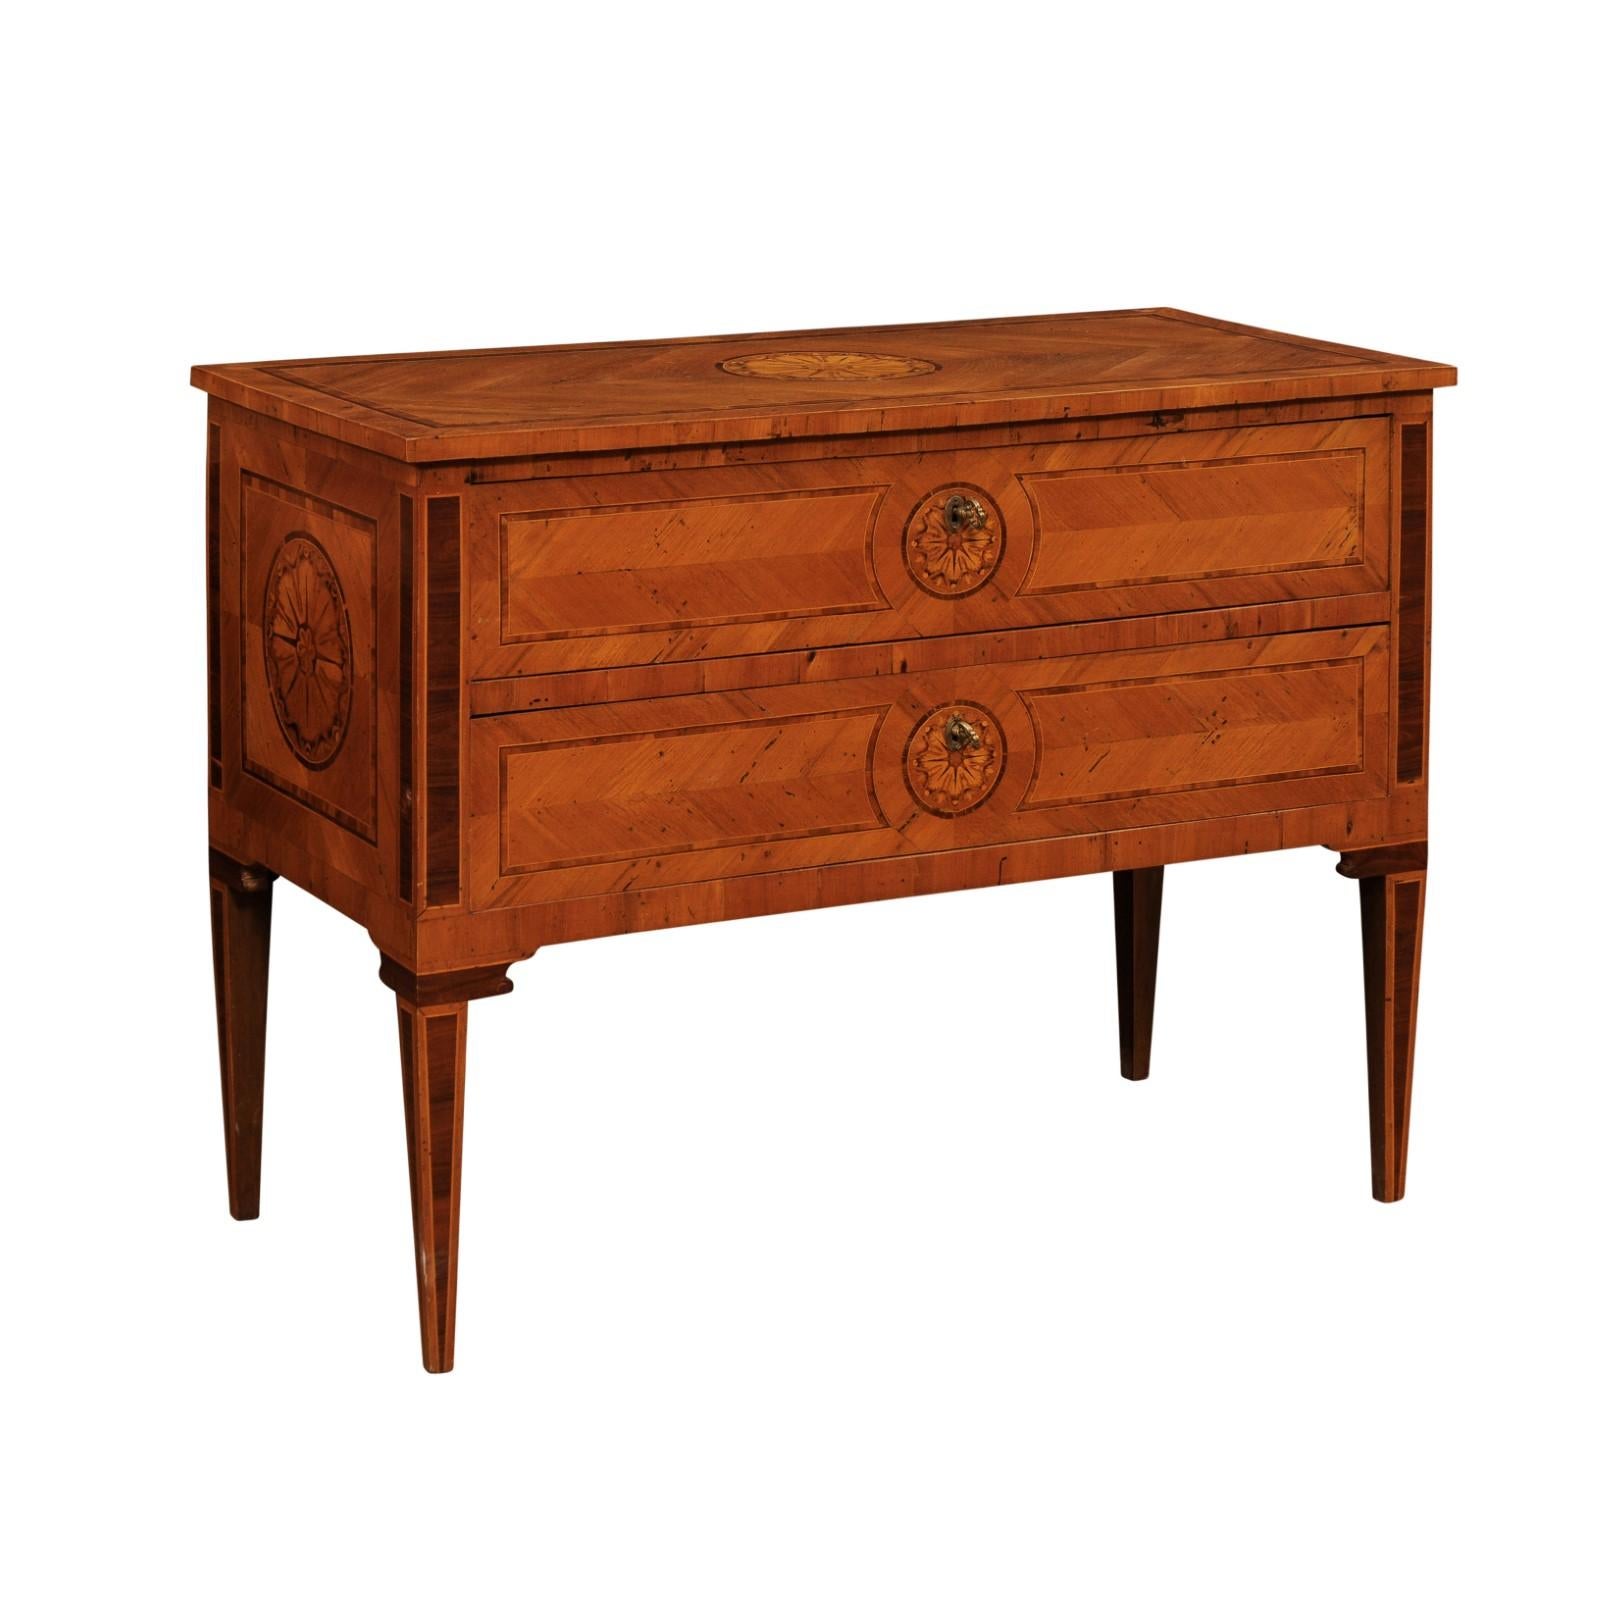 An Italian walnut and mahogany commode from circa 1900 with two drawers, marquetry, cross-banding and tapered legs. Delve into the world of Italian elegance with this circa 1900 Italian commode, a masterpiece of craftsmanship and design. This